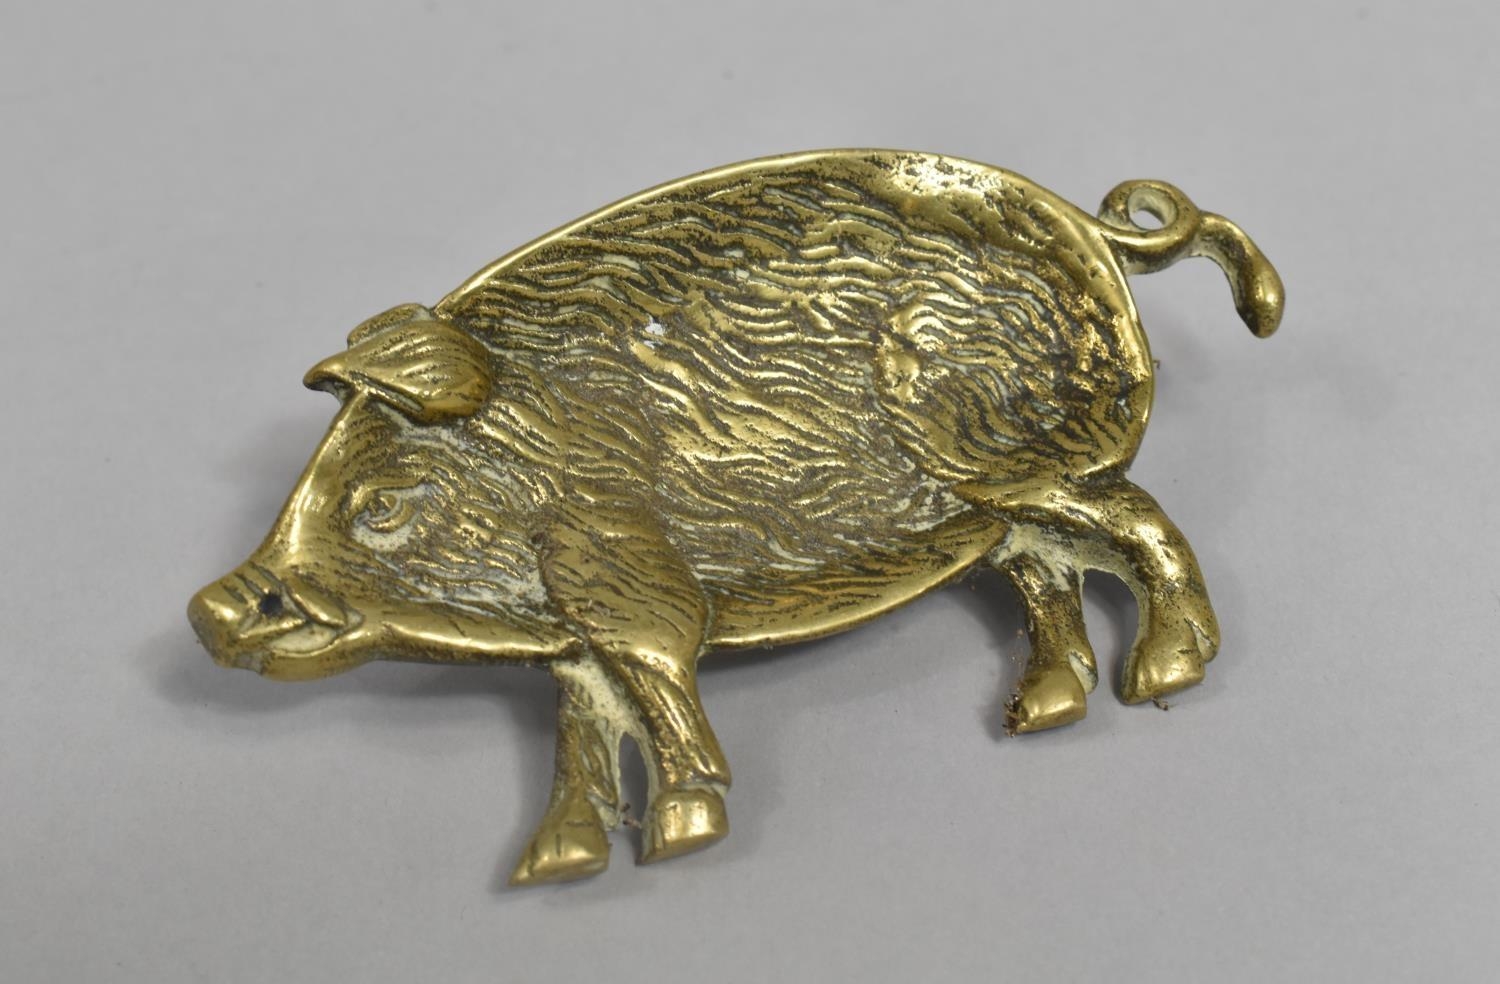 A Small Novelty Brass Shallow Dish in the Form of a Pig, 11.5cms Wide